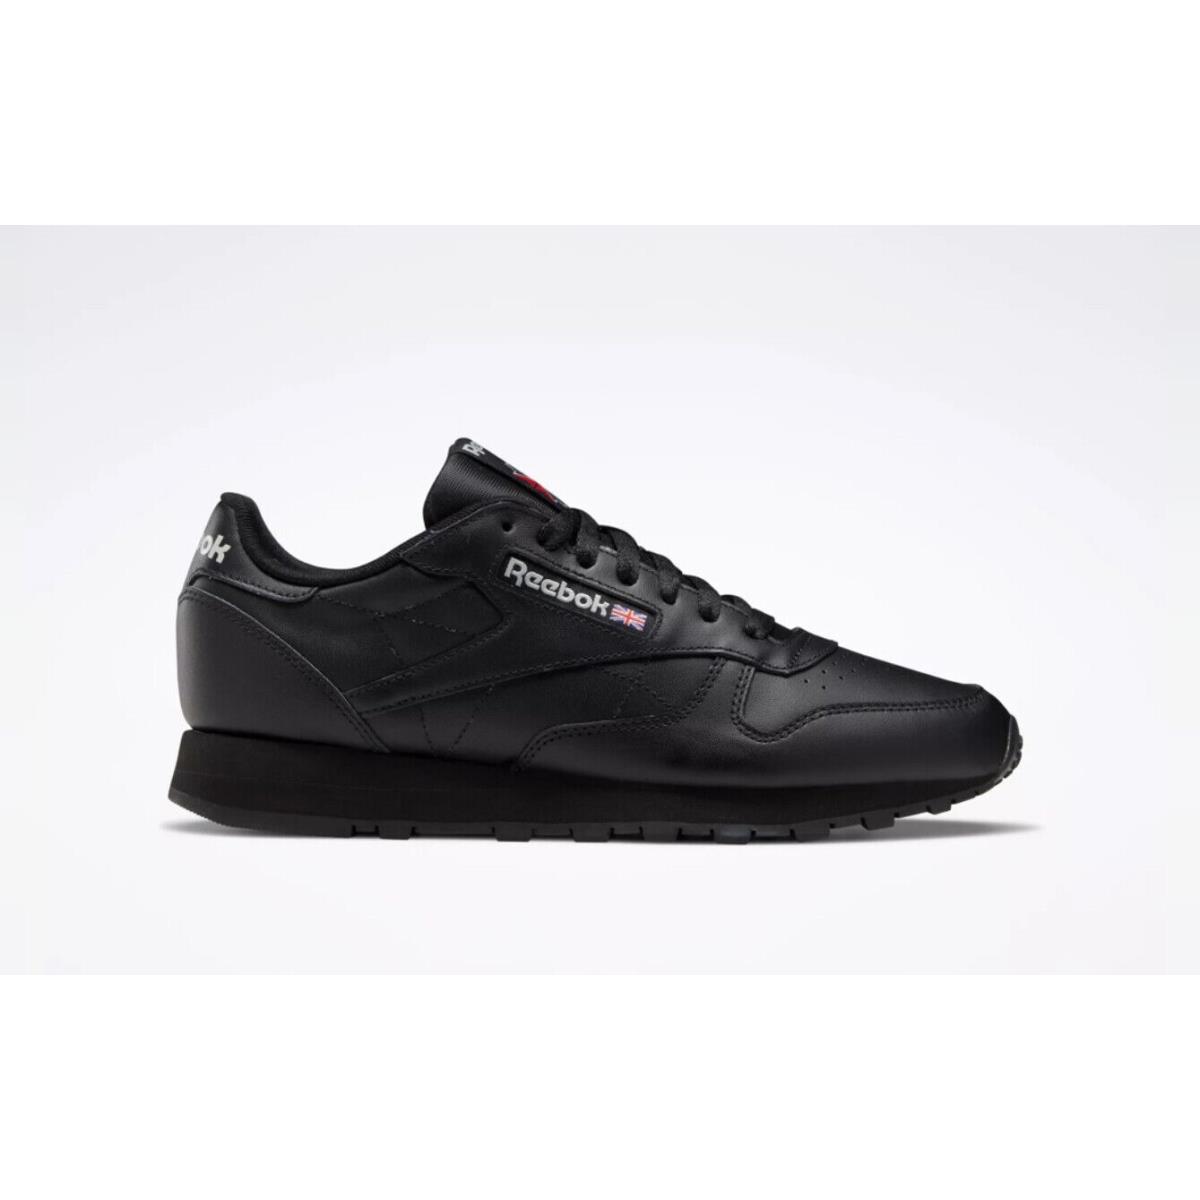 Reebok Classic Leather Black Black Pure Grey Mens Shoes Fashion Sneakers